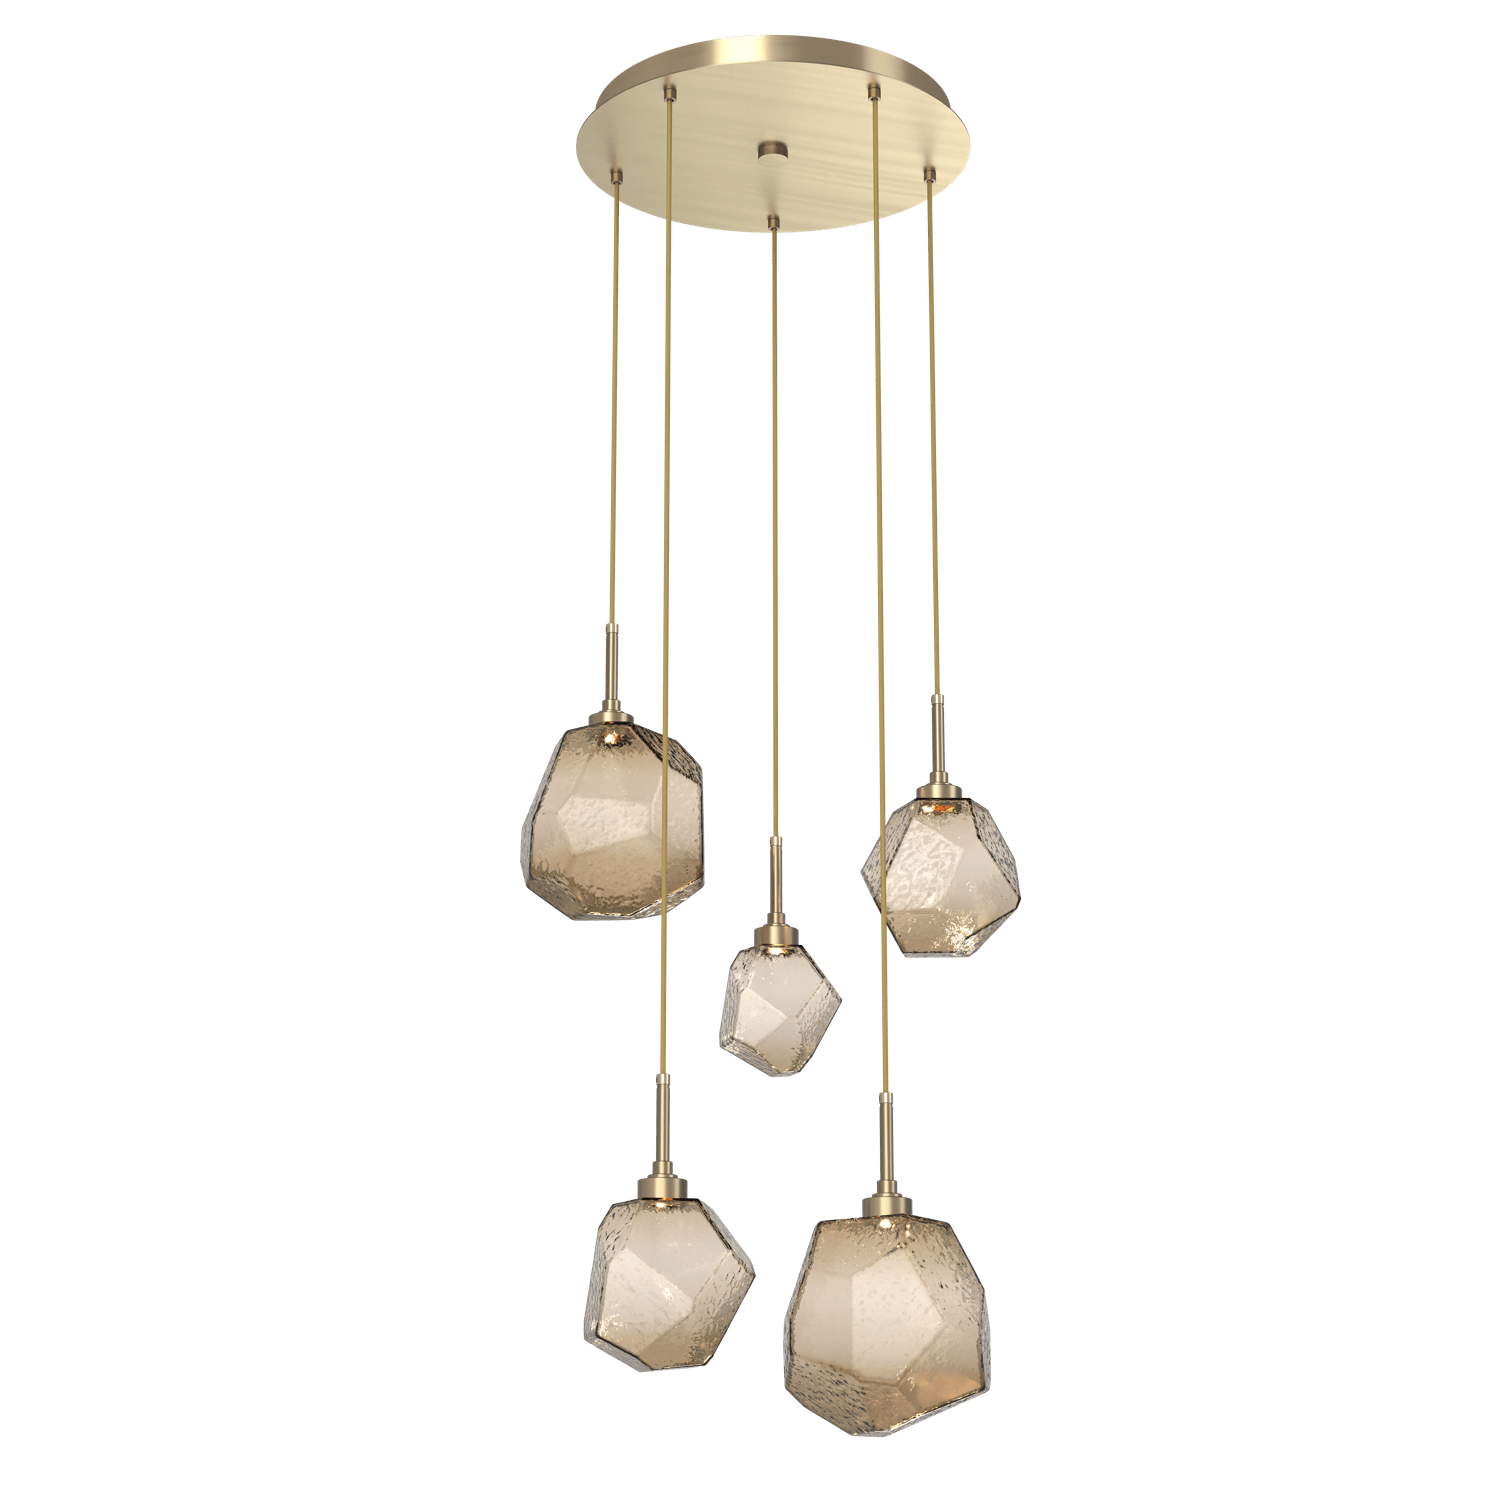 CHB0039-05-HB-B-Hammerton-Studio-Gem-5-light-round-pendant-chandelier-with-heritage-brass-finish-and-bronze-blown-glass-shades-and-LED-lamping